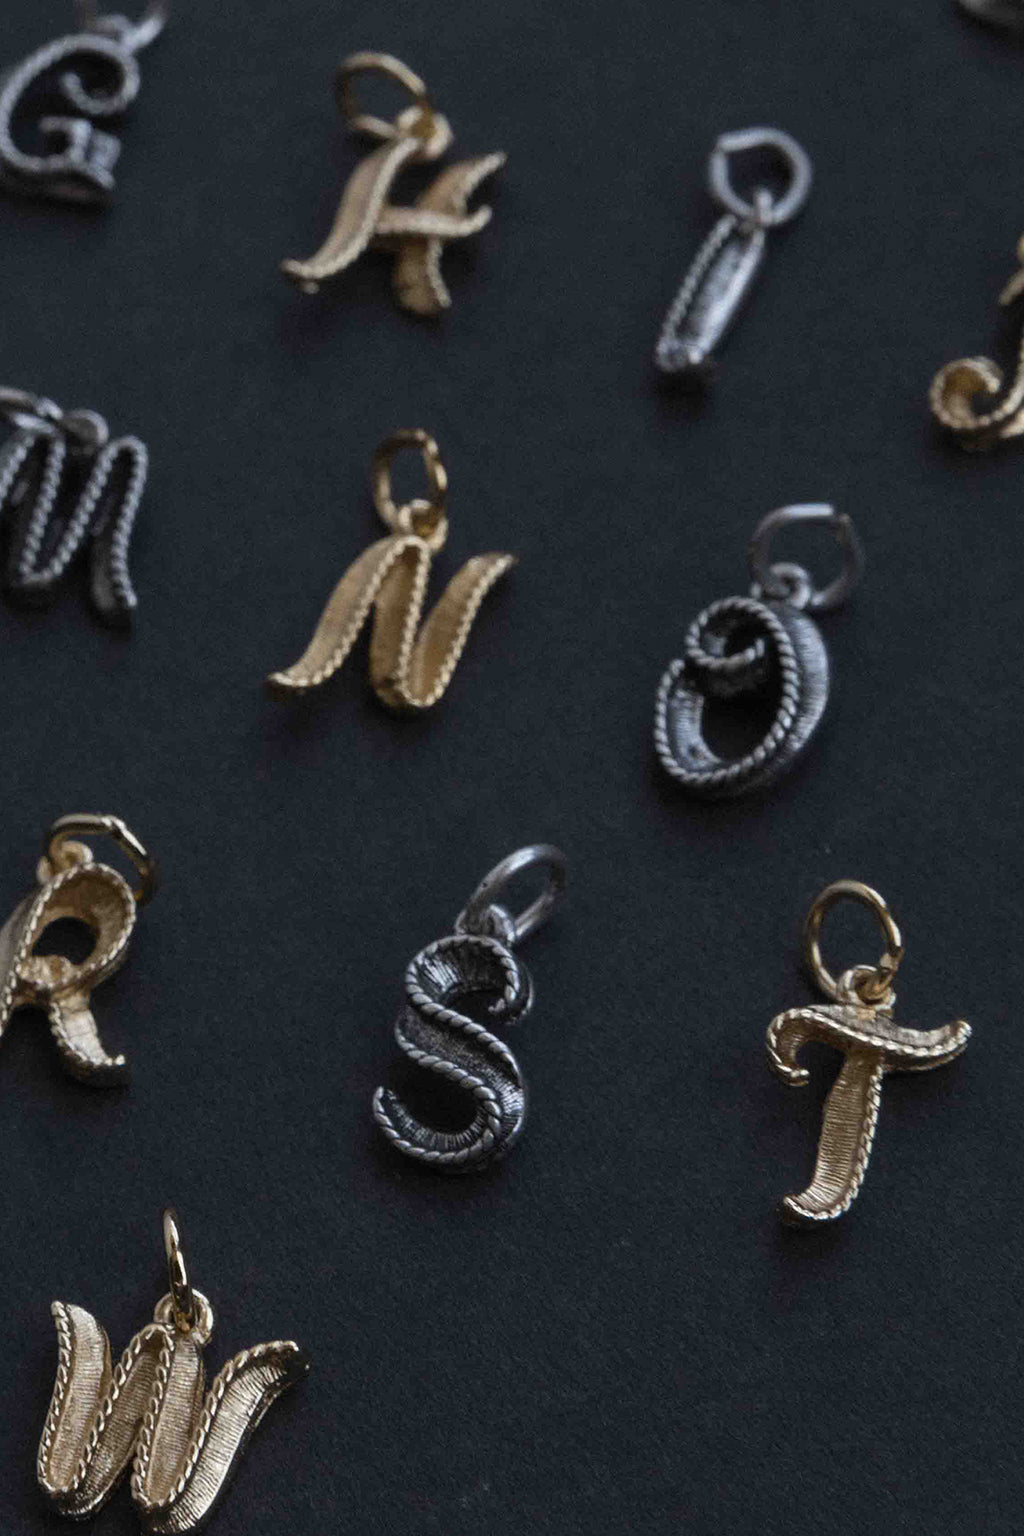 initials Here Alphabet Charm - initials Charms 14kt Gold / B